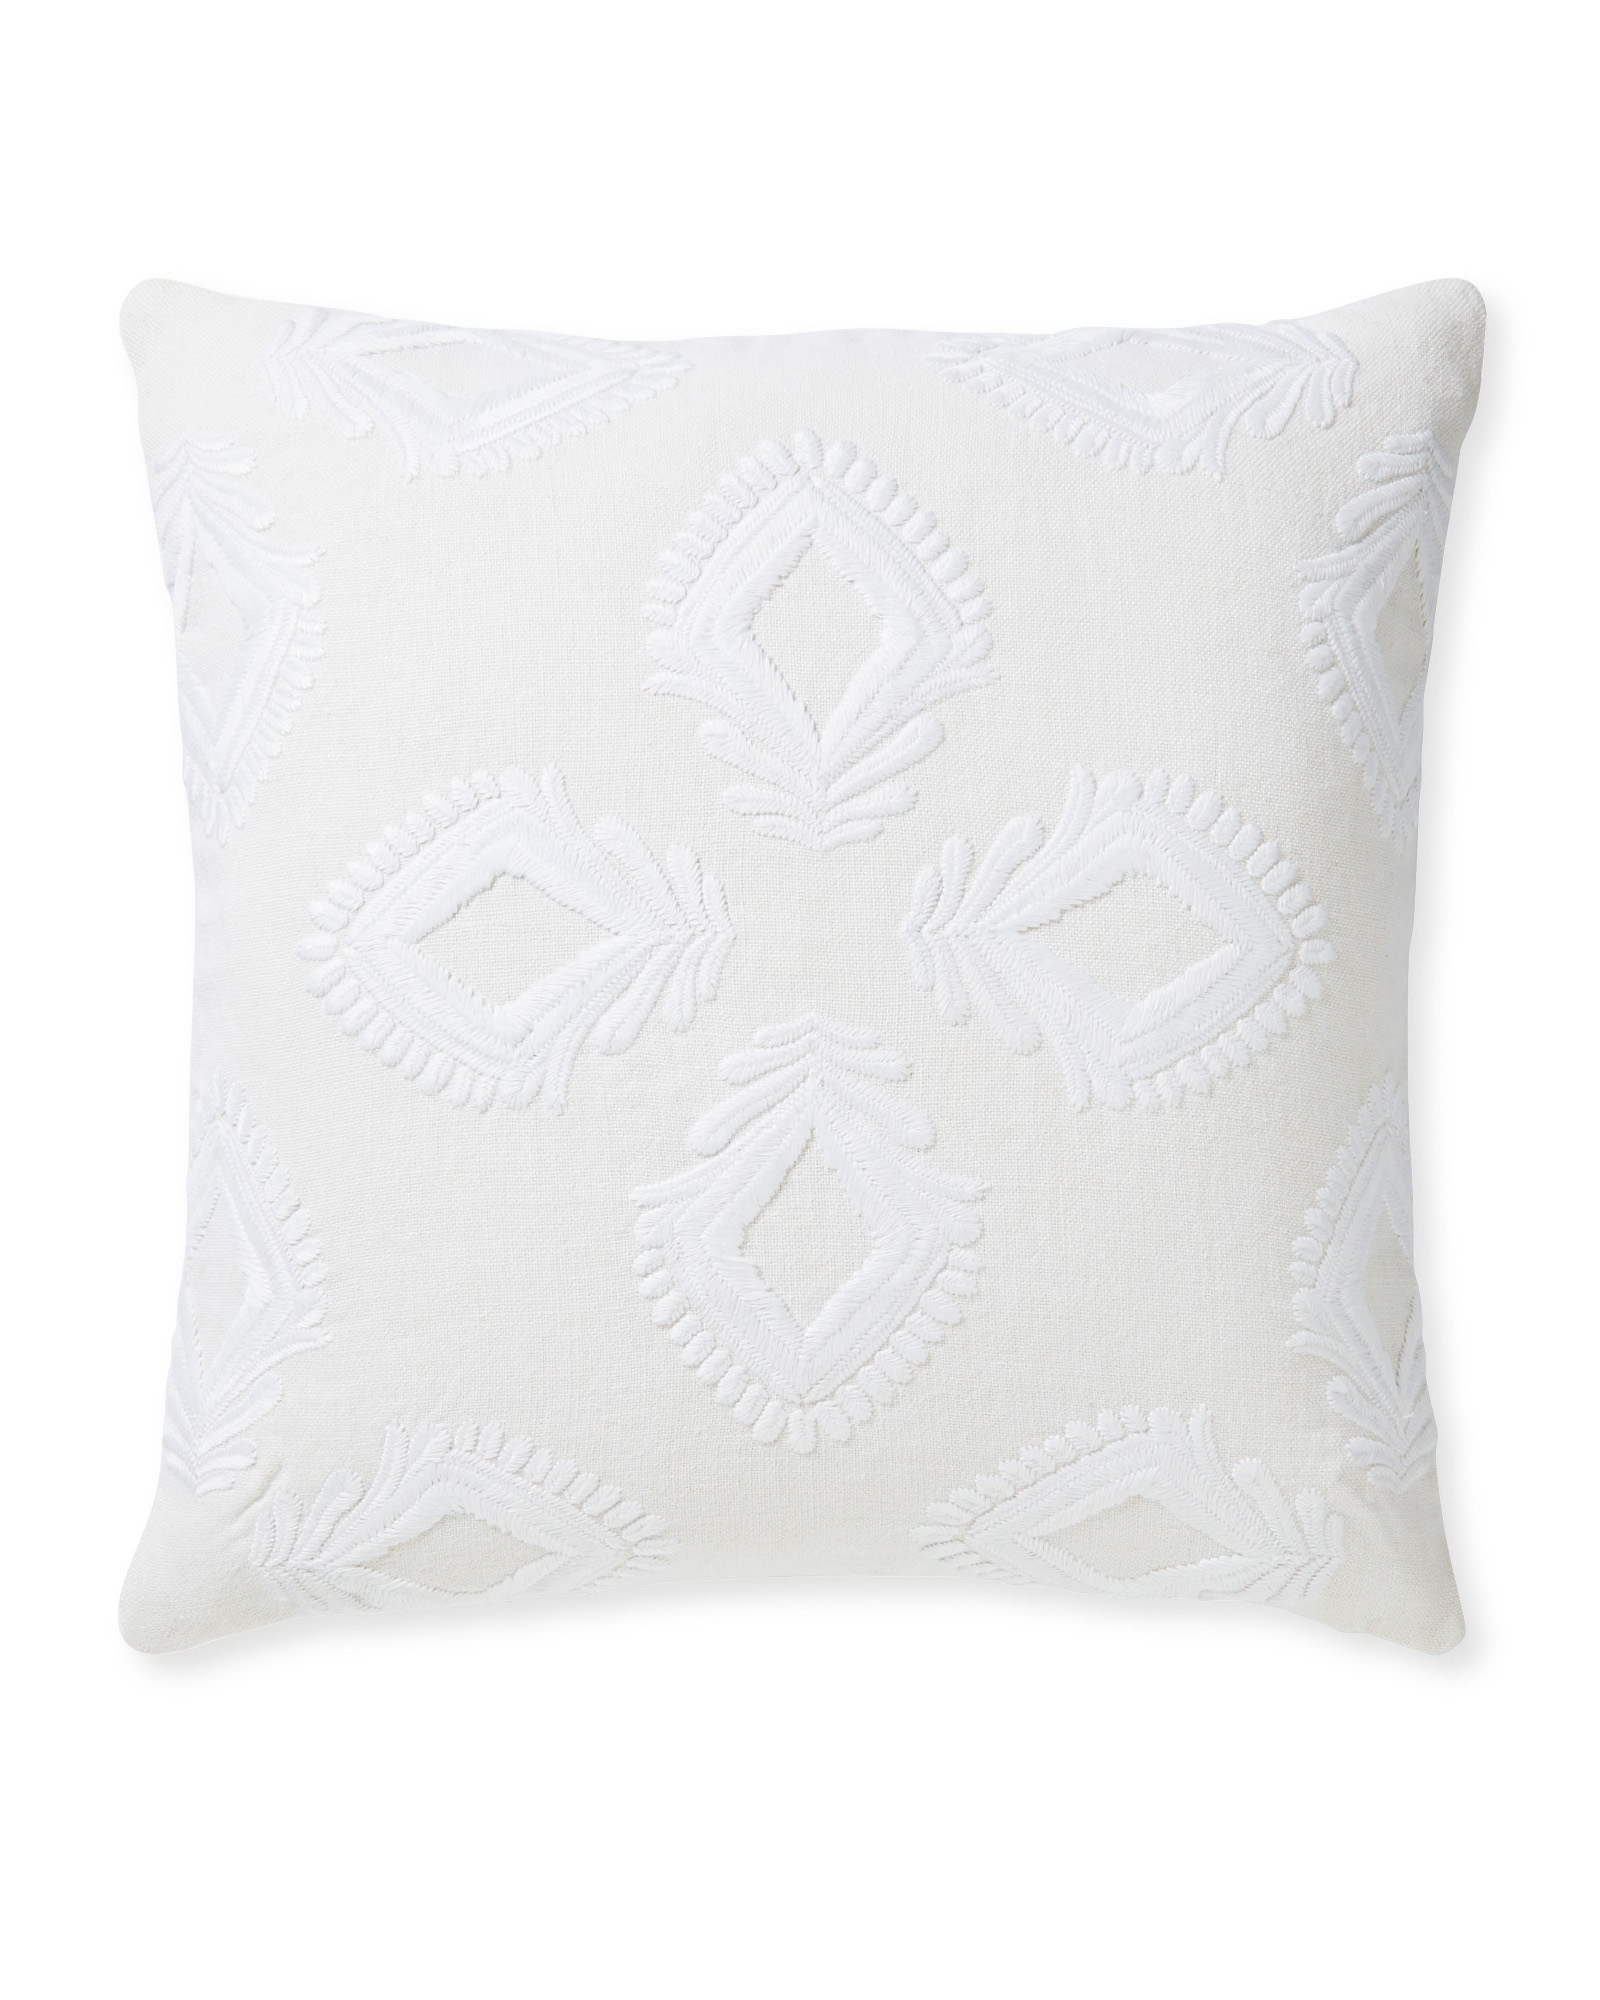 Leighton 24" SQ Pillow Cover - White - Insert sold separately - Image 0